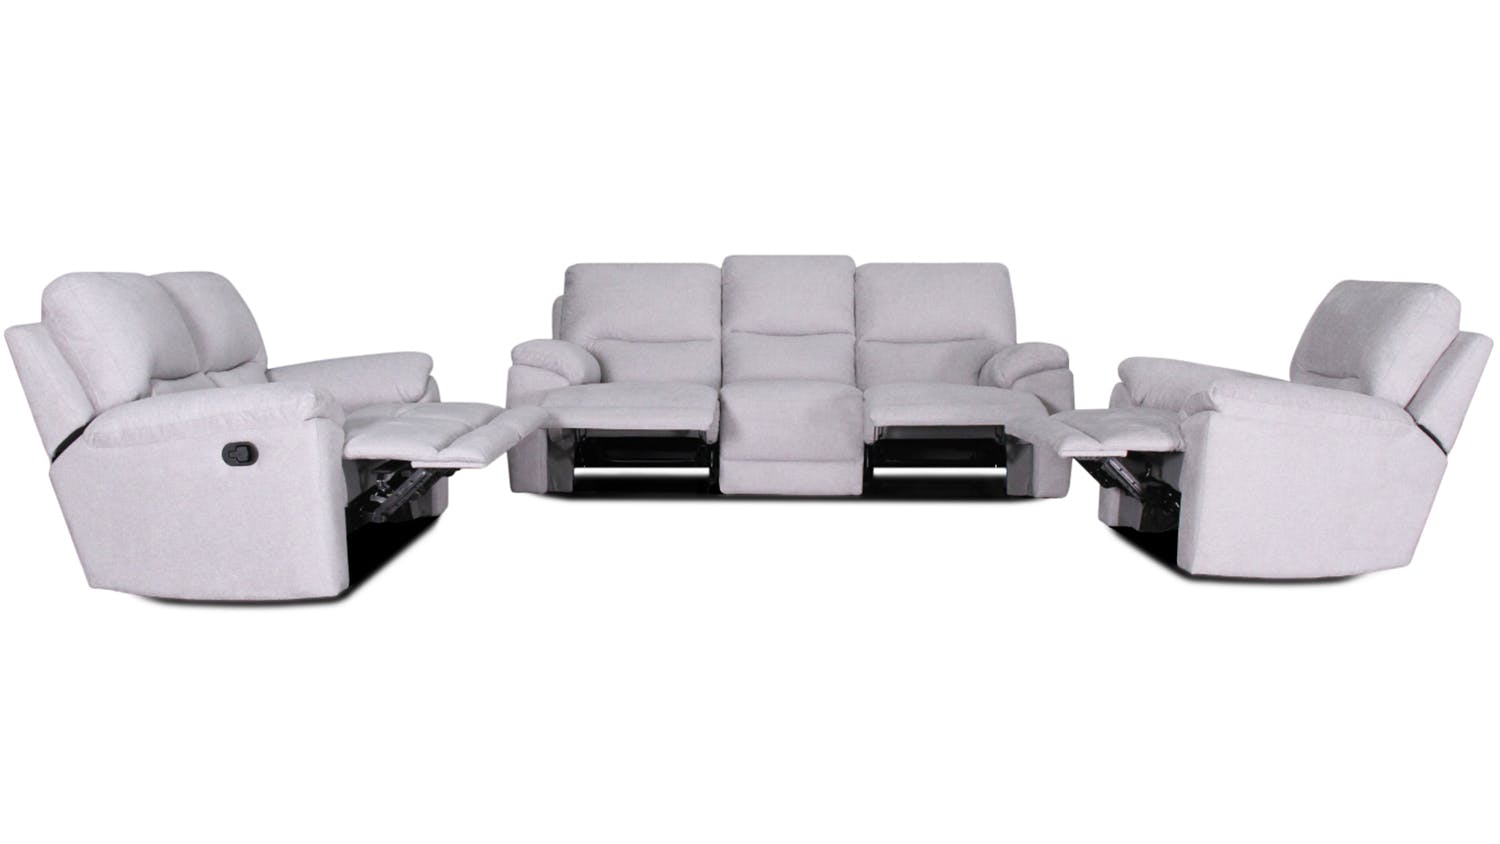 Featherstone 3 Piece Fabric Recliner Lounge Suite